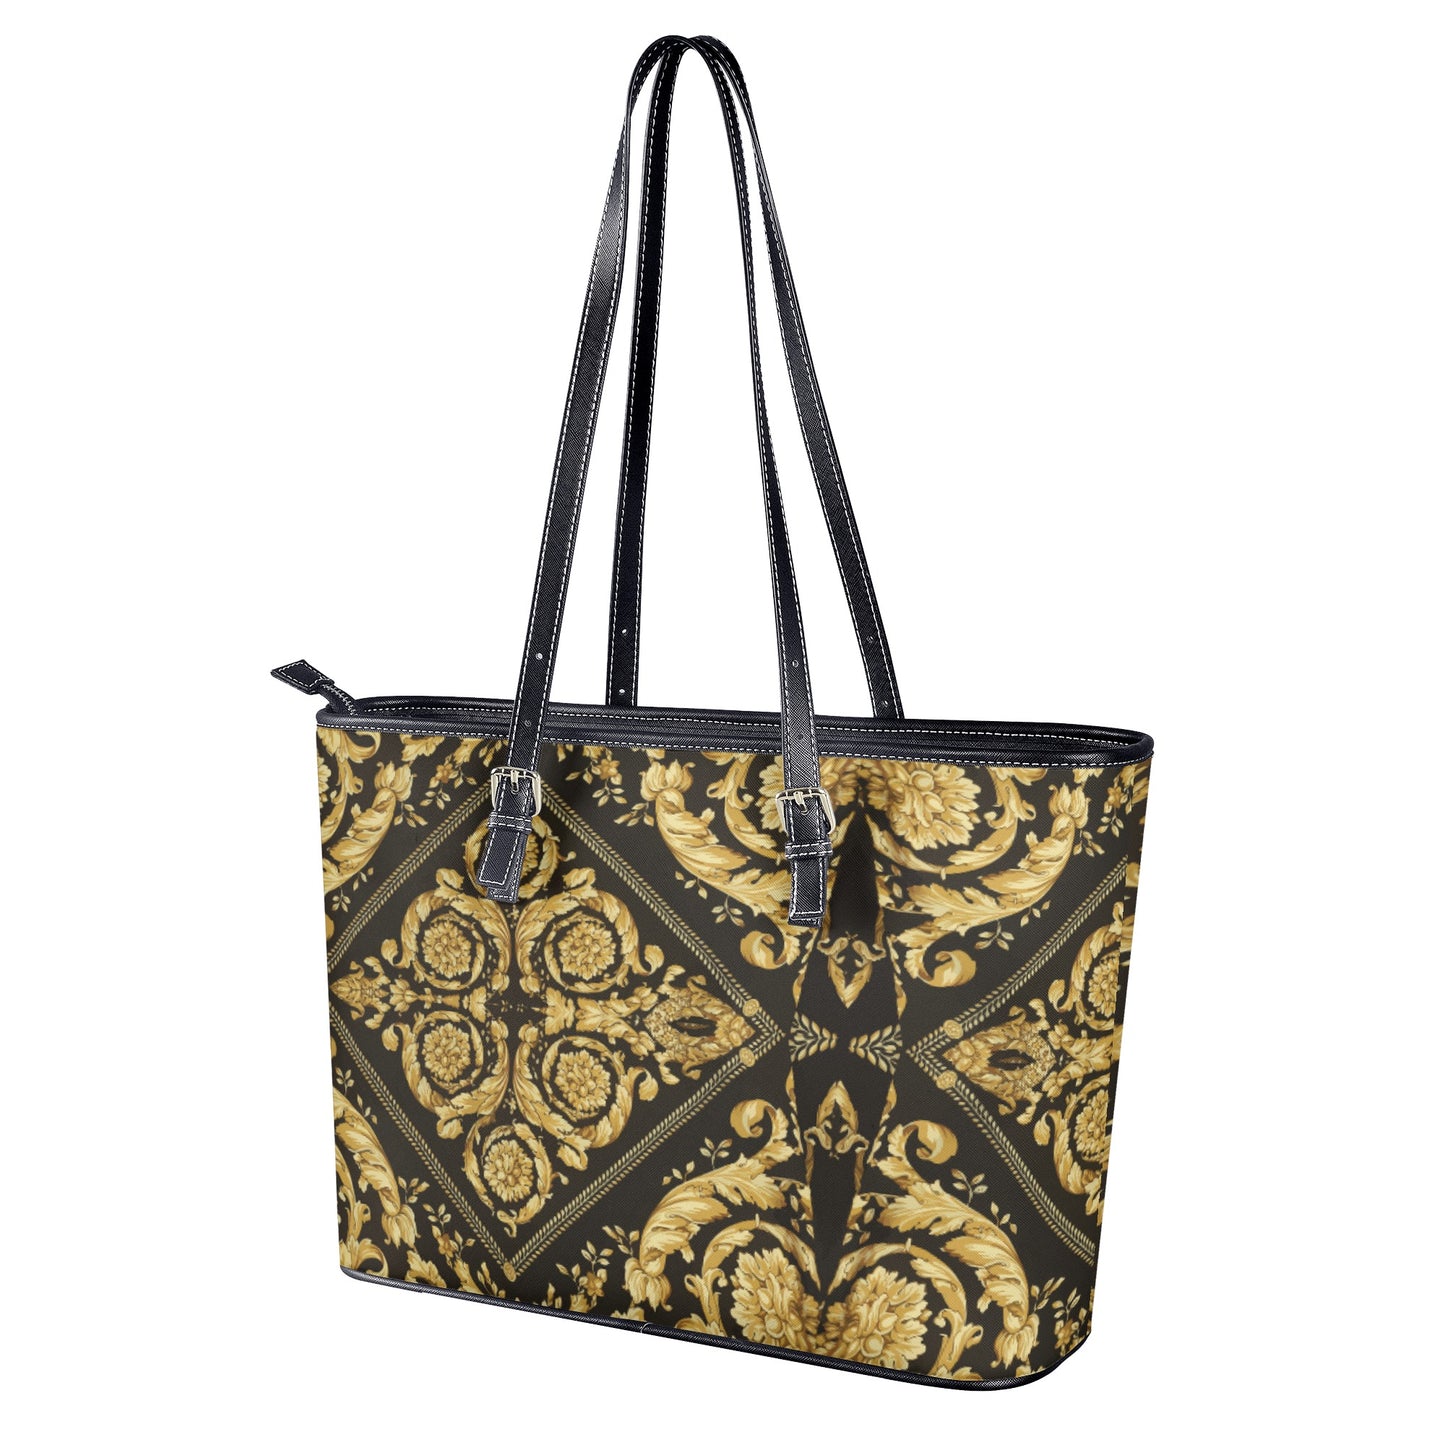 Baroque Scarf Print Gold Leather Tote Bag - HipHatter